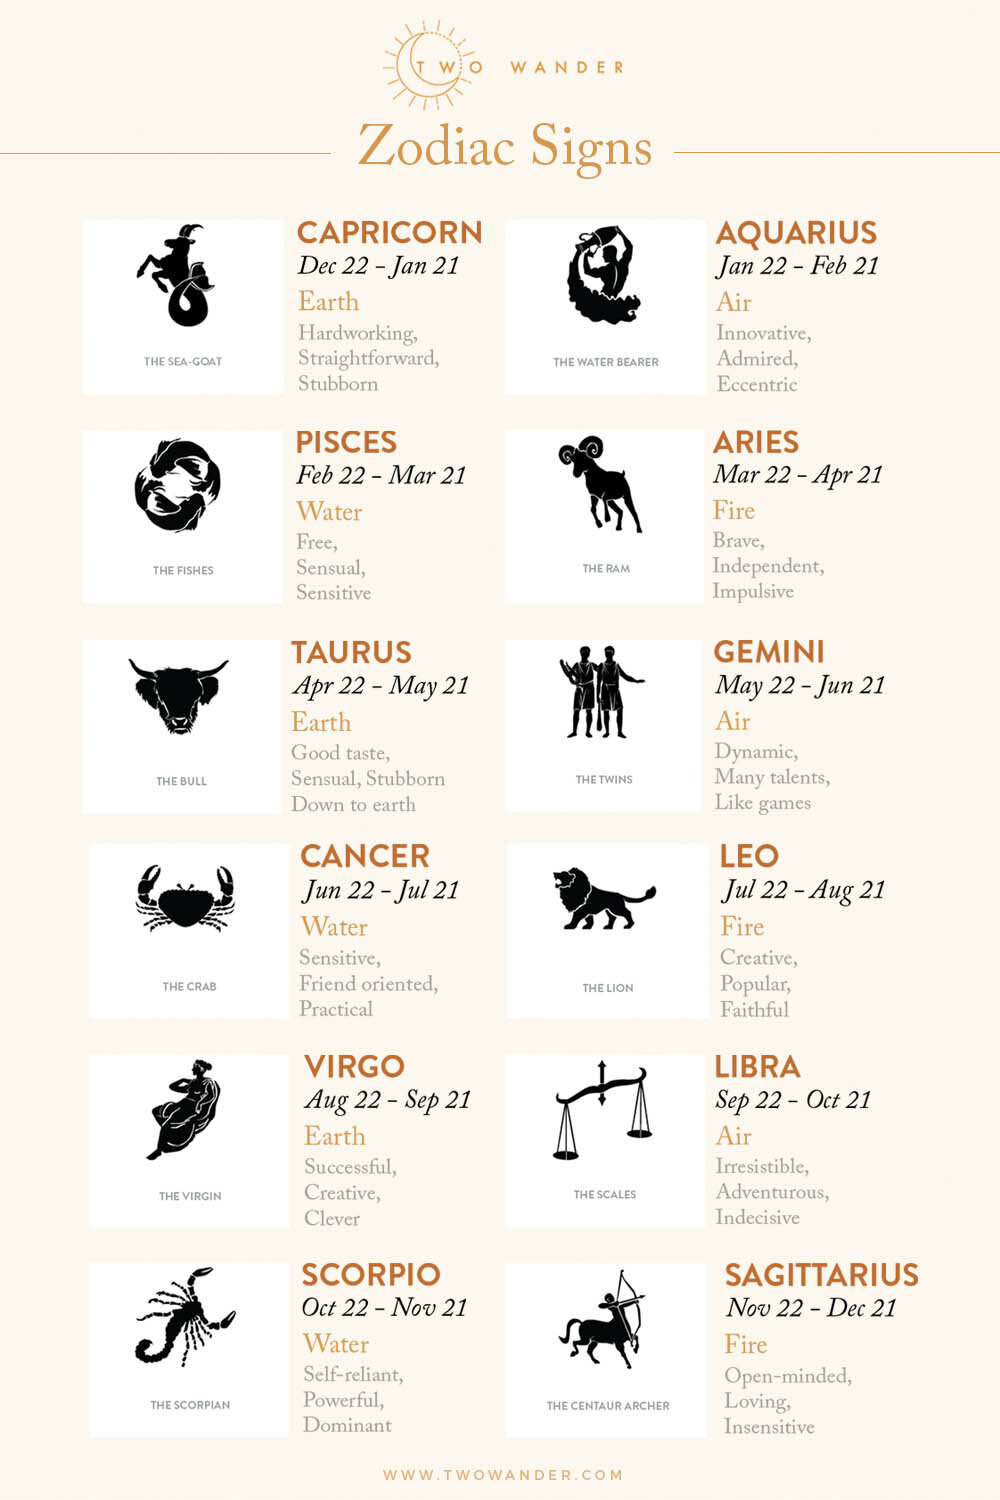 How To Use Zodiac For Benefits